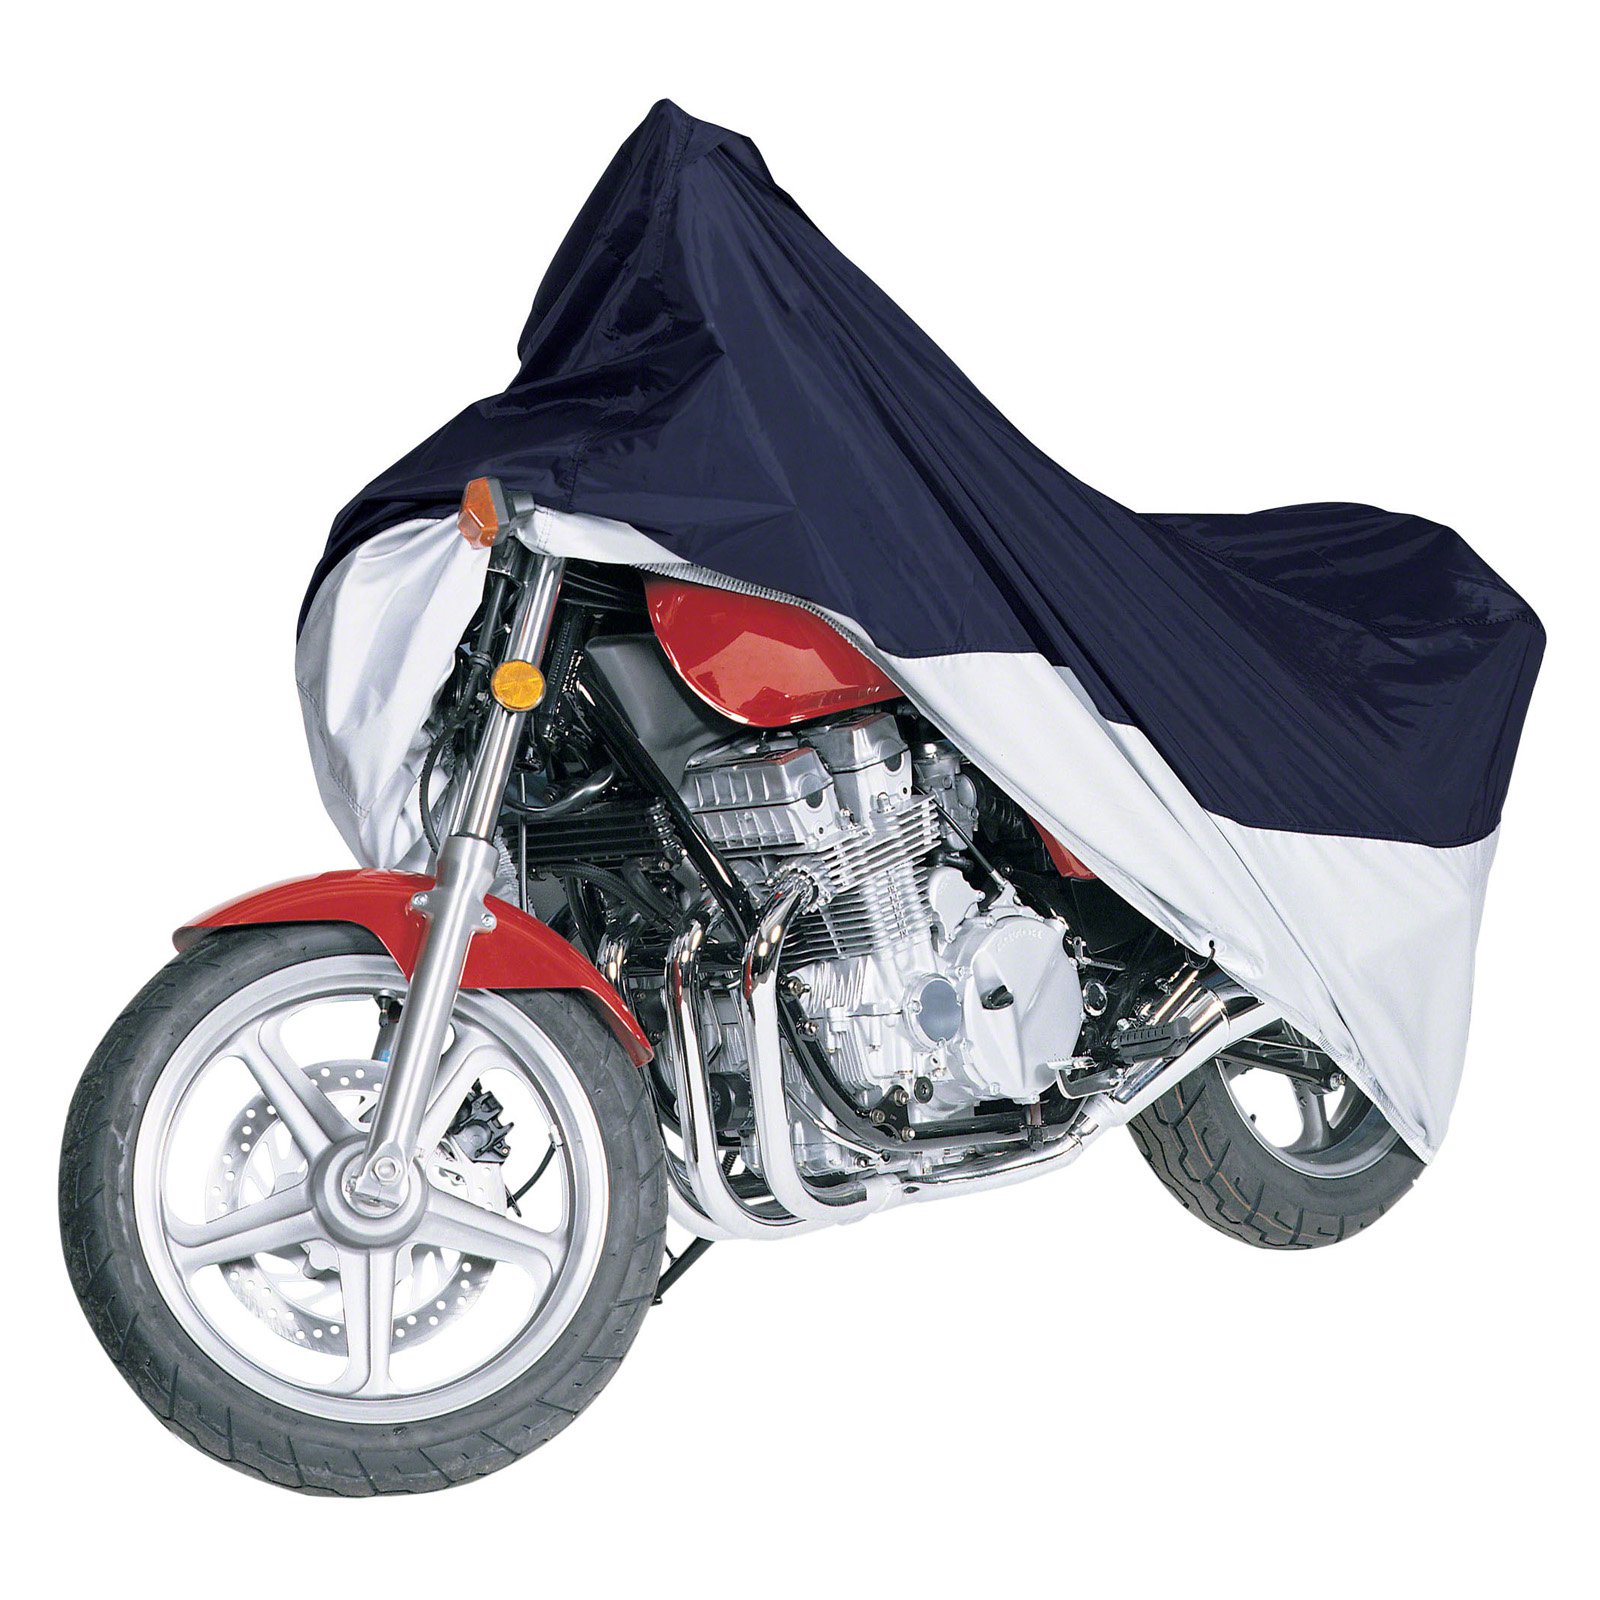 Classic Accessories 65-005-033501-00 MotoGear Motorcyle Cover, Blue/Silver, Large - image 2 of 5